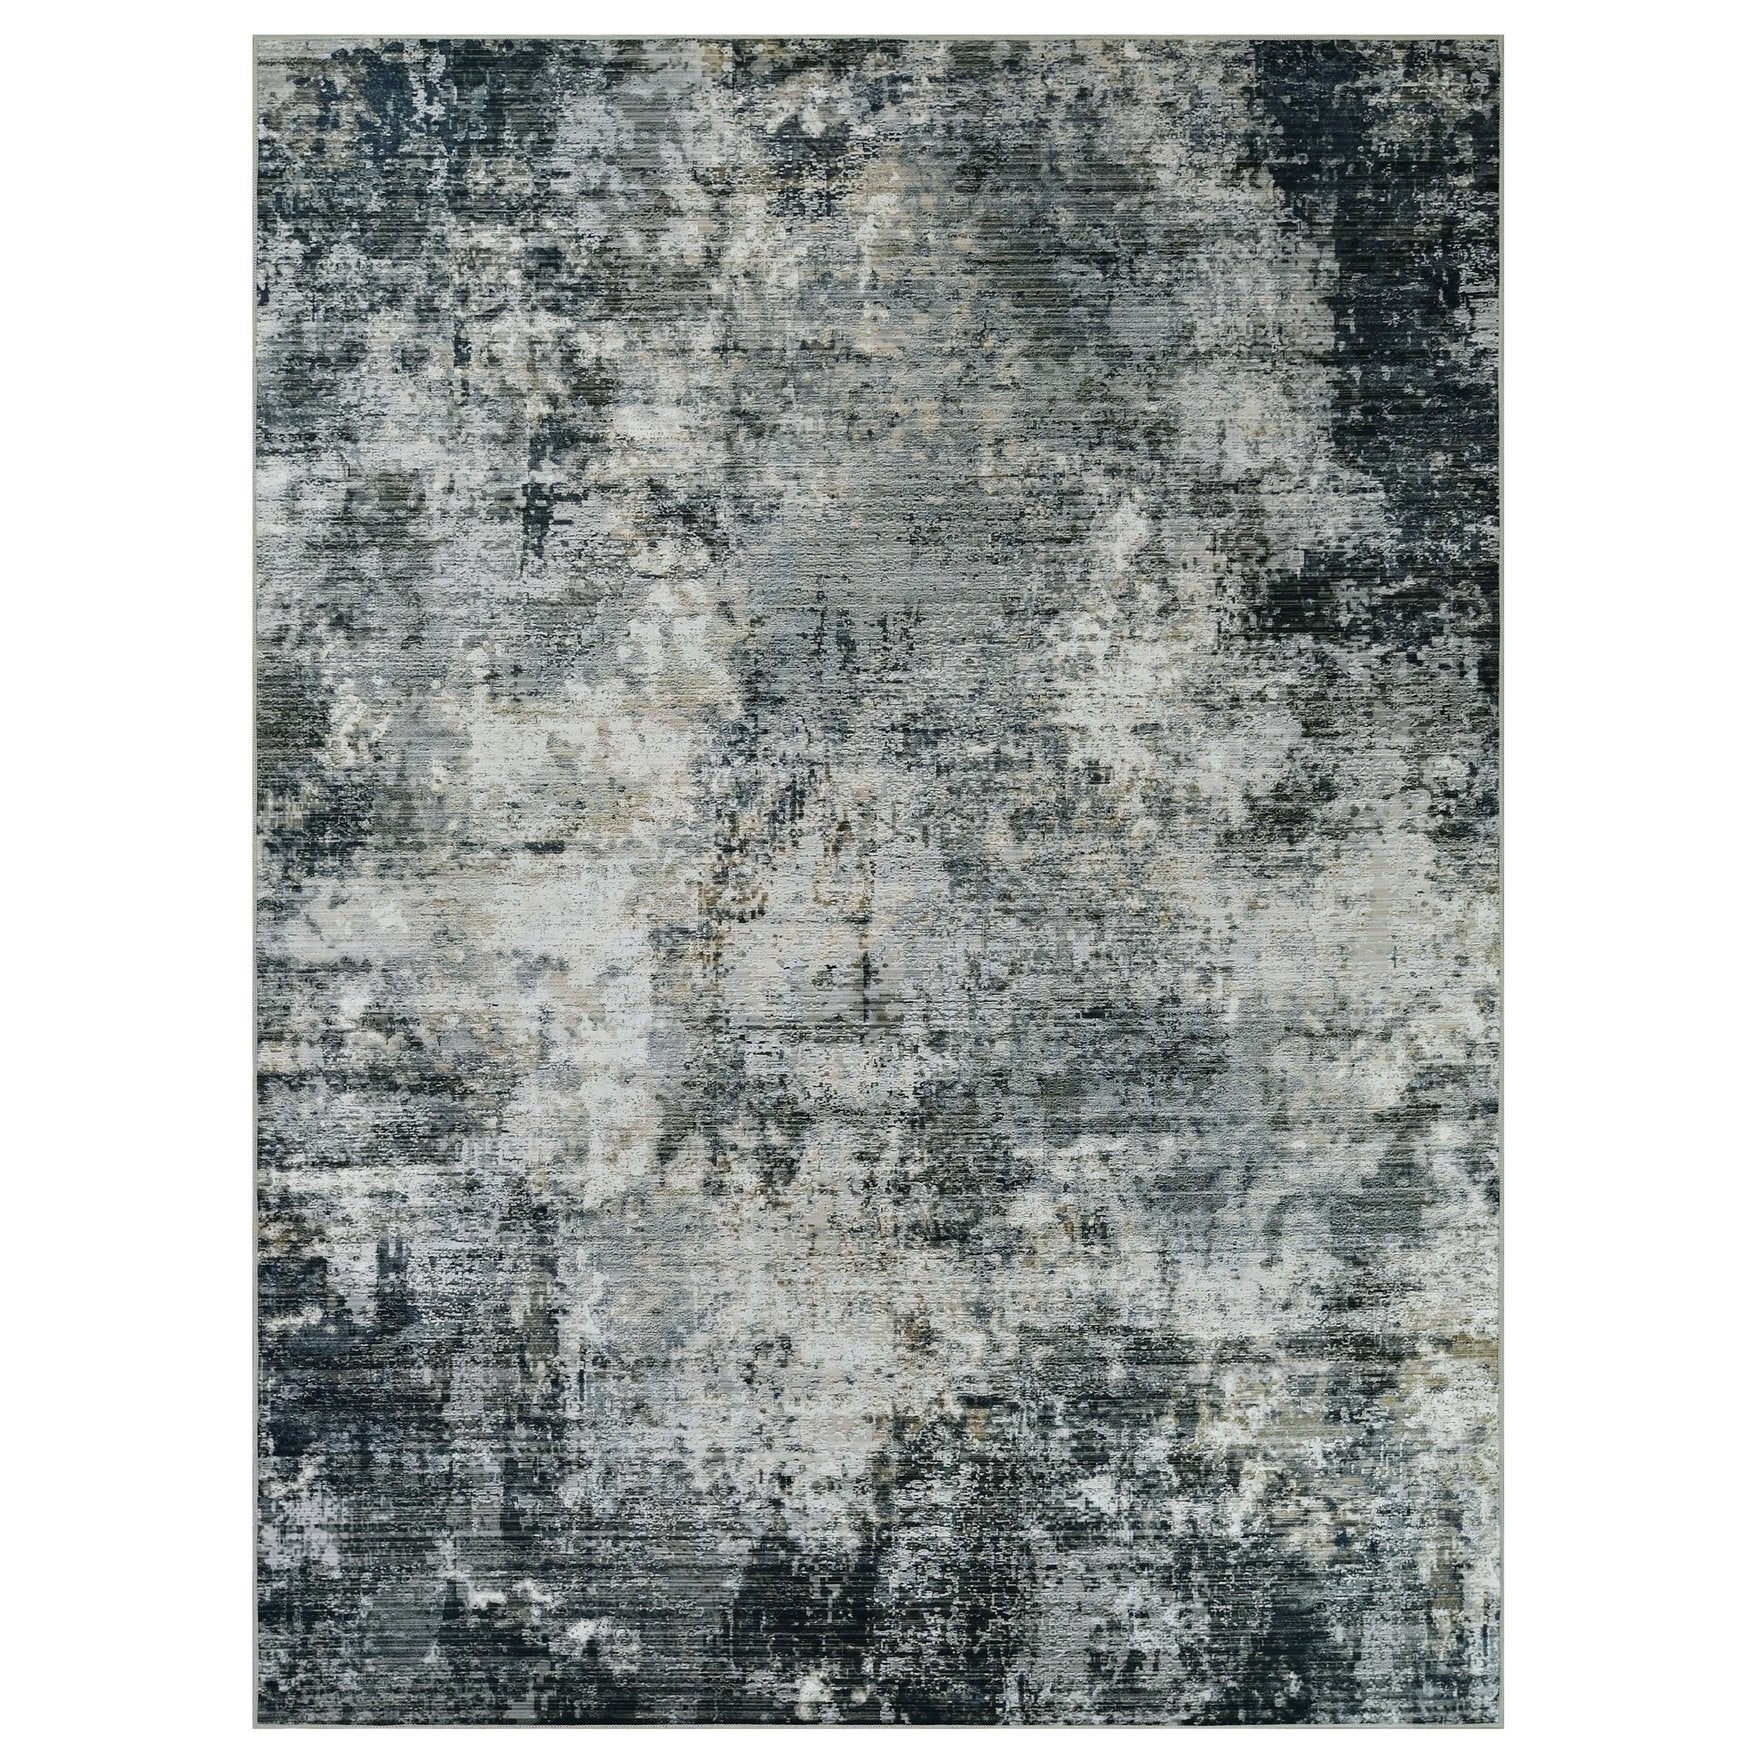 HR Abstract Area Rug - Non-Slip Rubber Backing, Polyester, Flat Texture # 1104